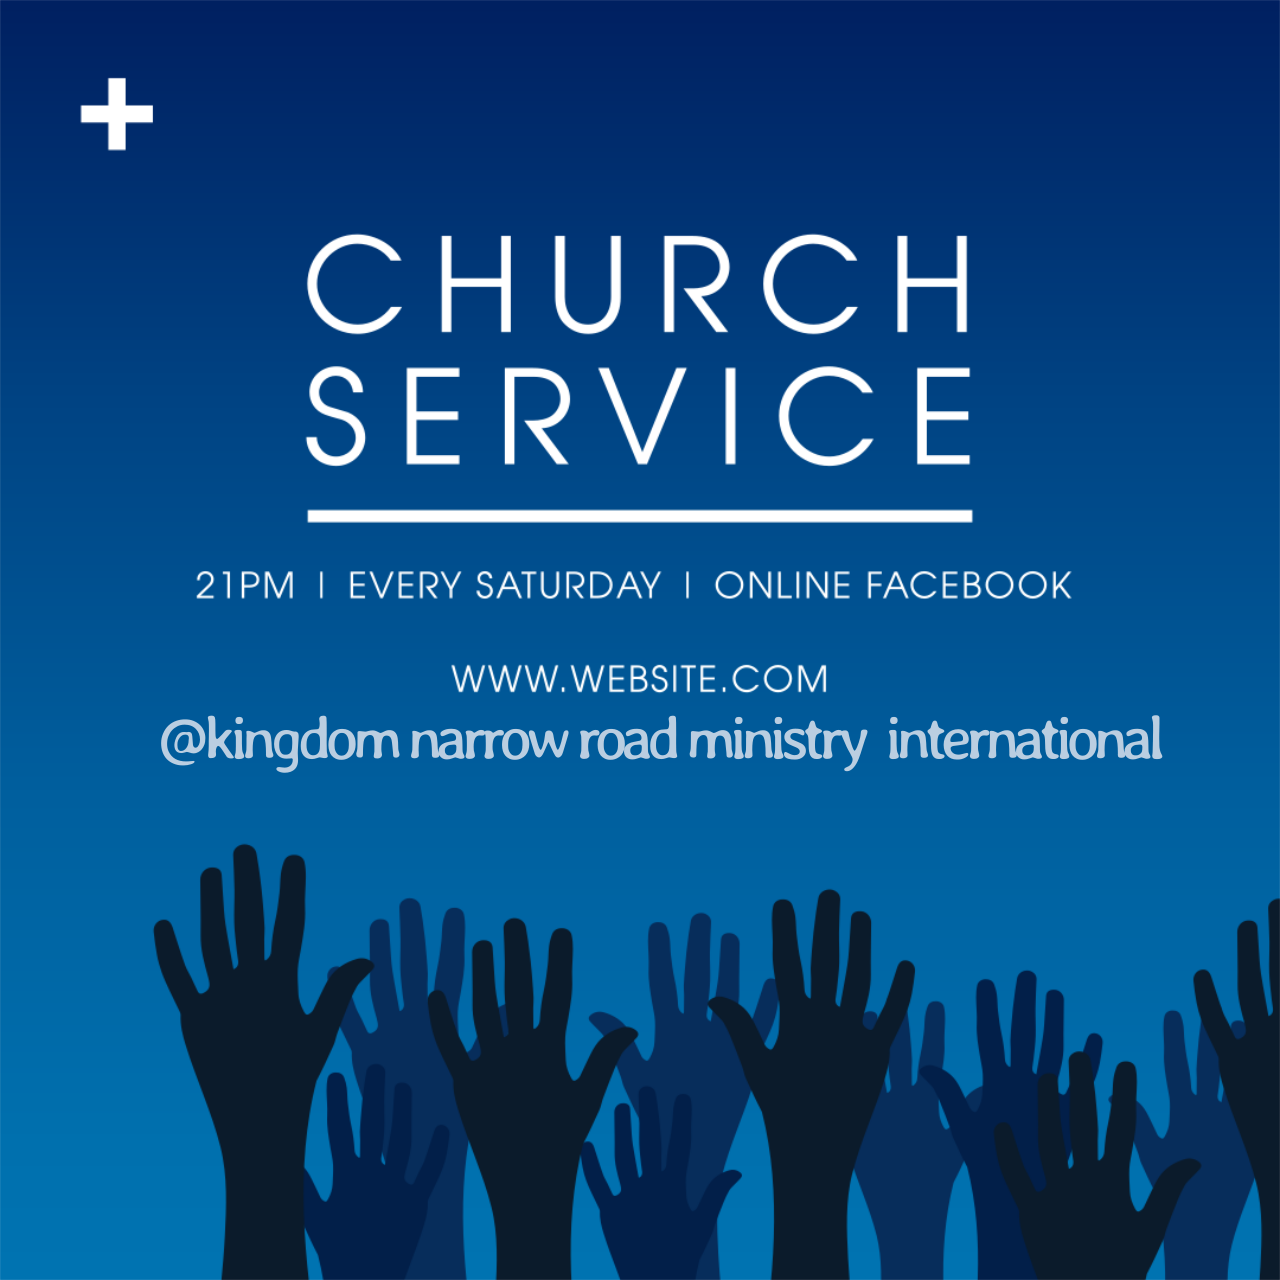 21PM | EVERY SATURDAY | ONLINE FACEBOOK's web page